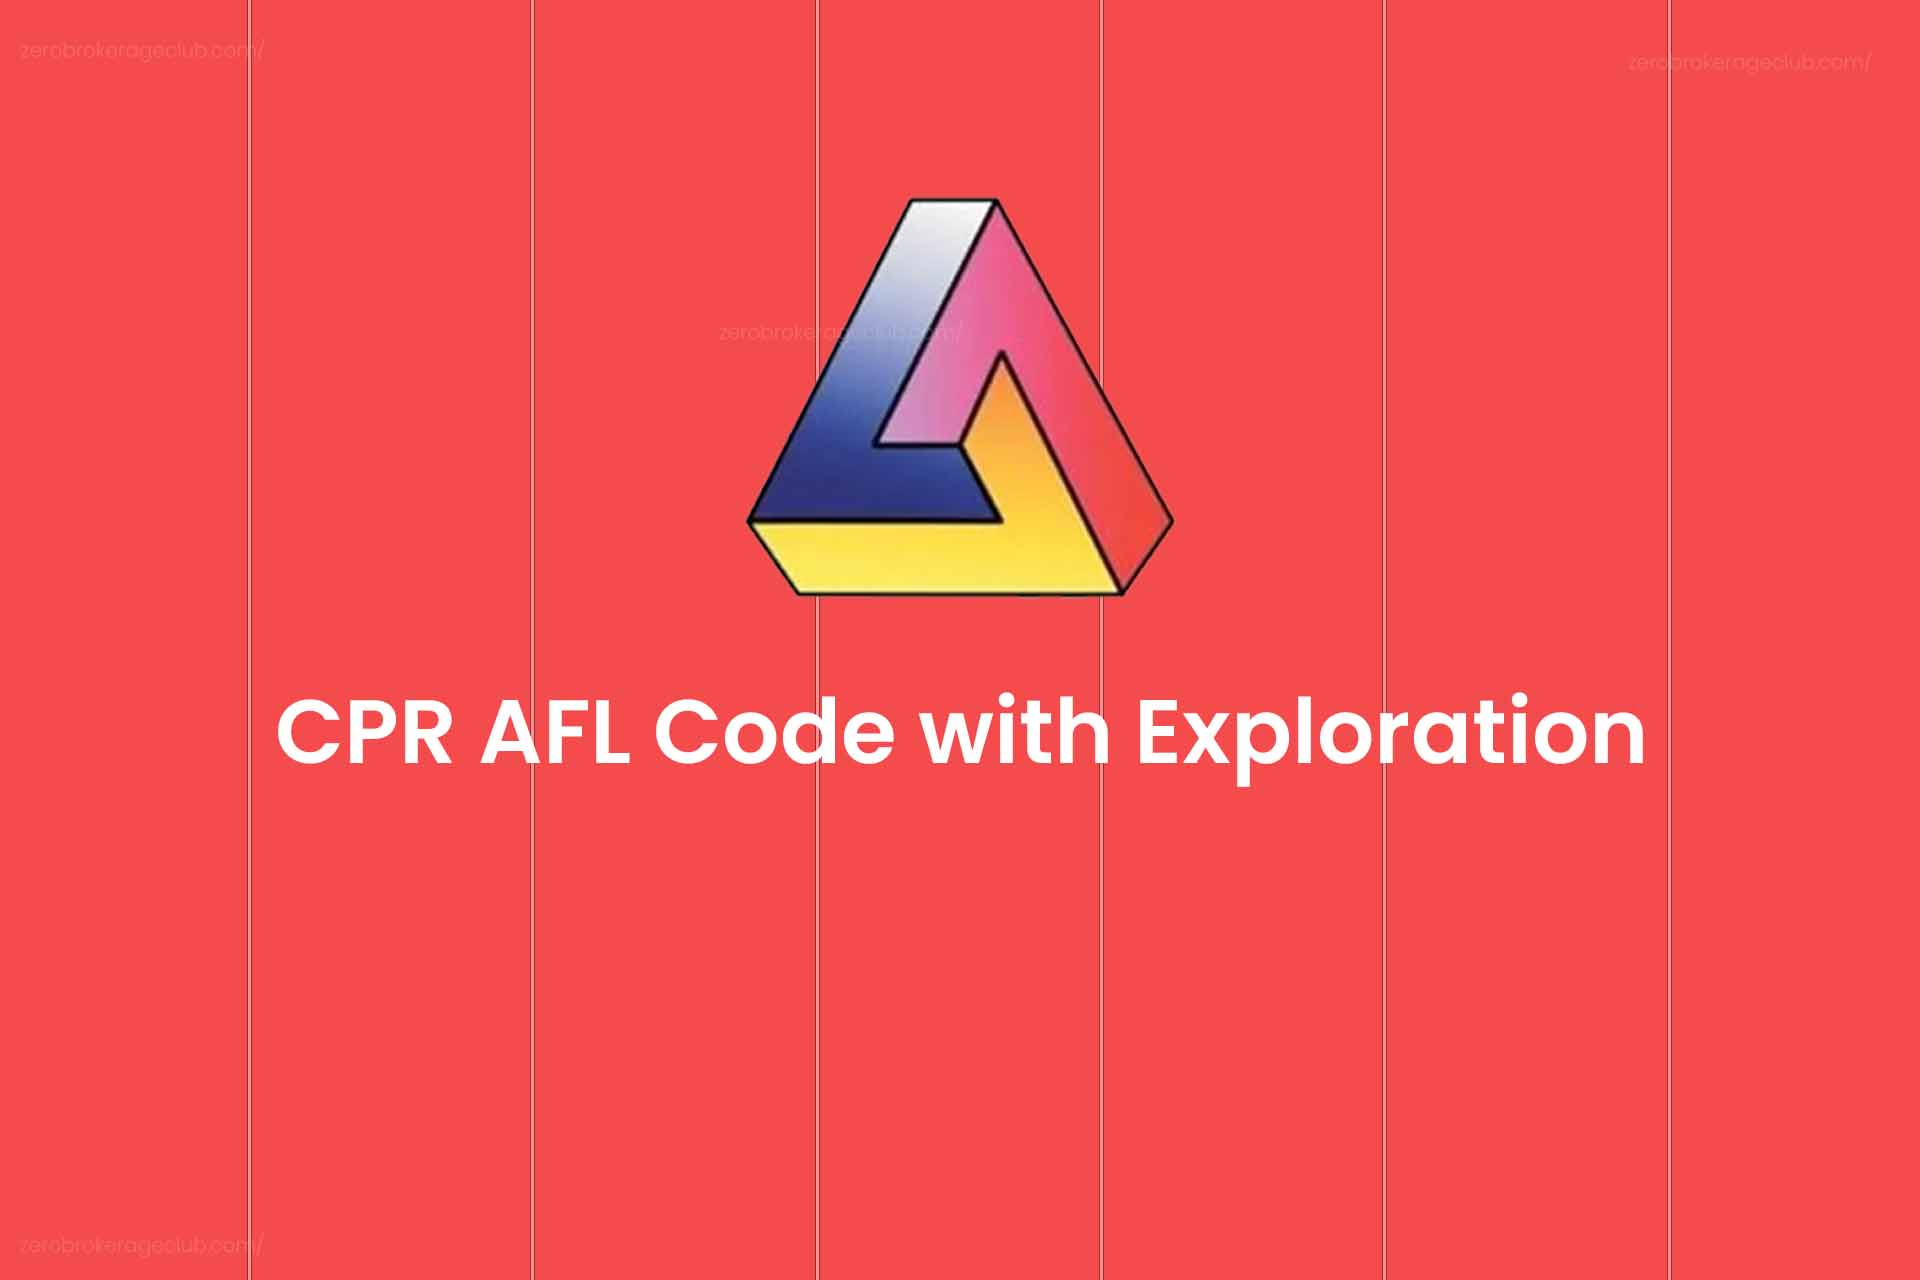 CPR AFL Code with Exploration